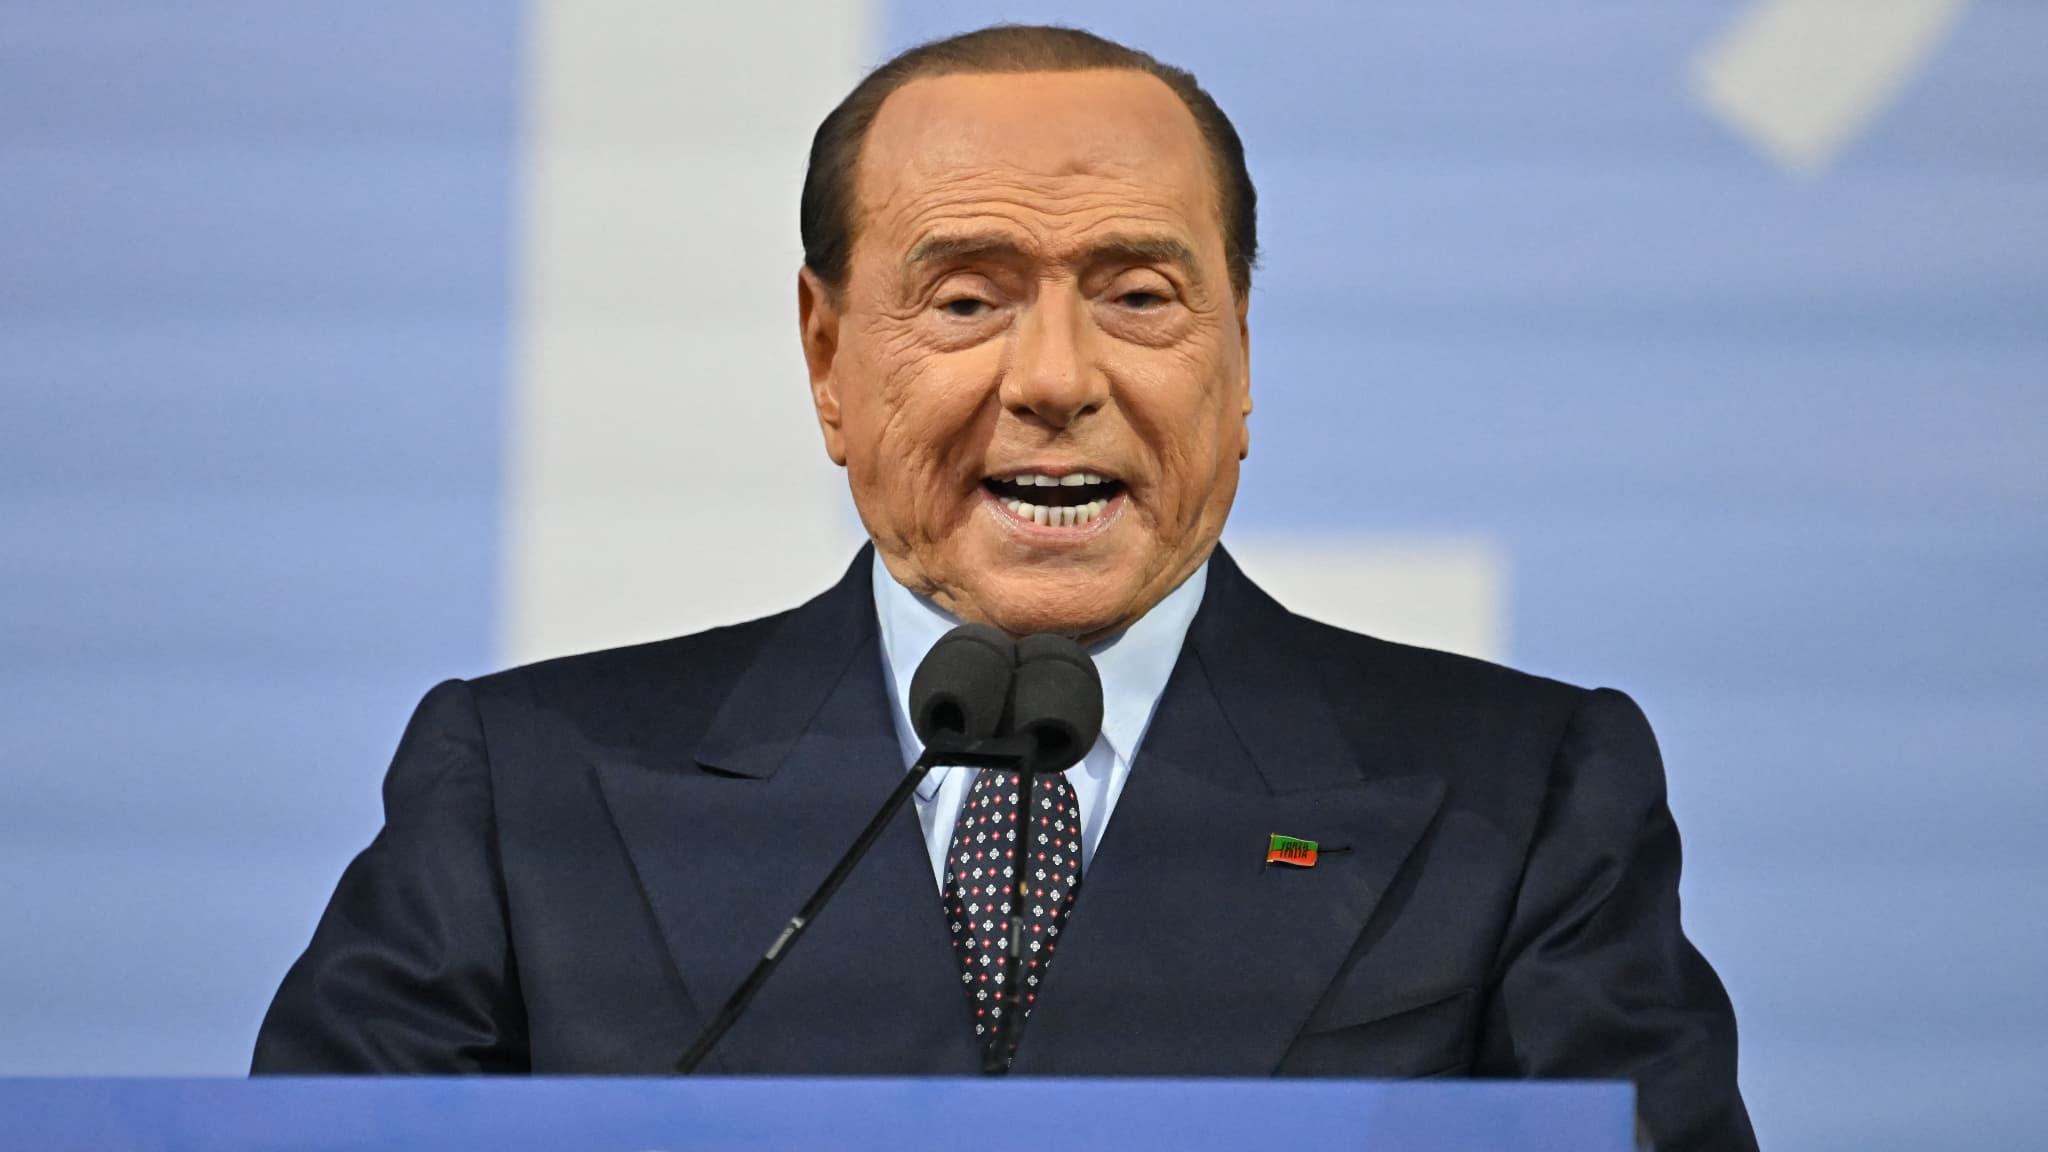 silvio-berlusconi-italy-s-former-prime-minister-dies-aged-86-time-news